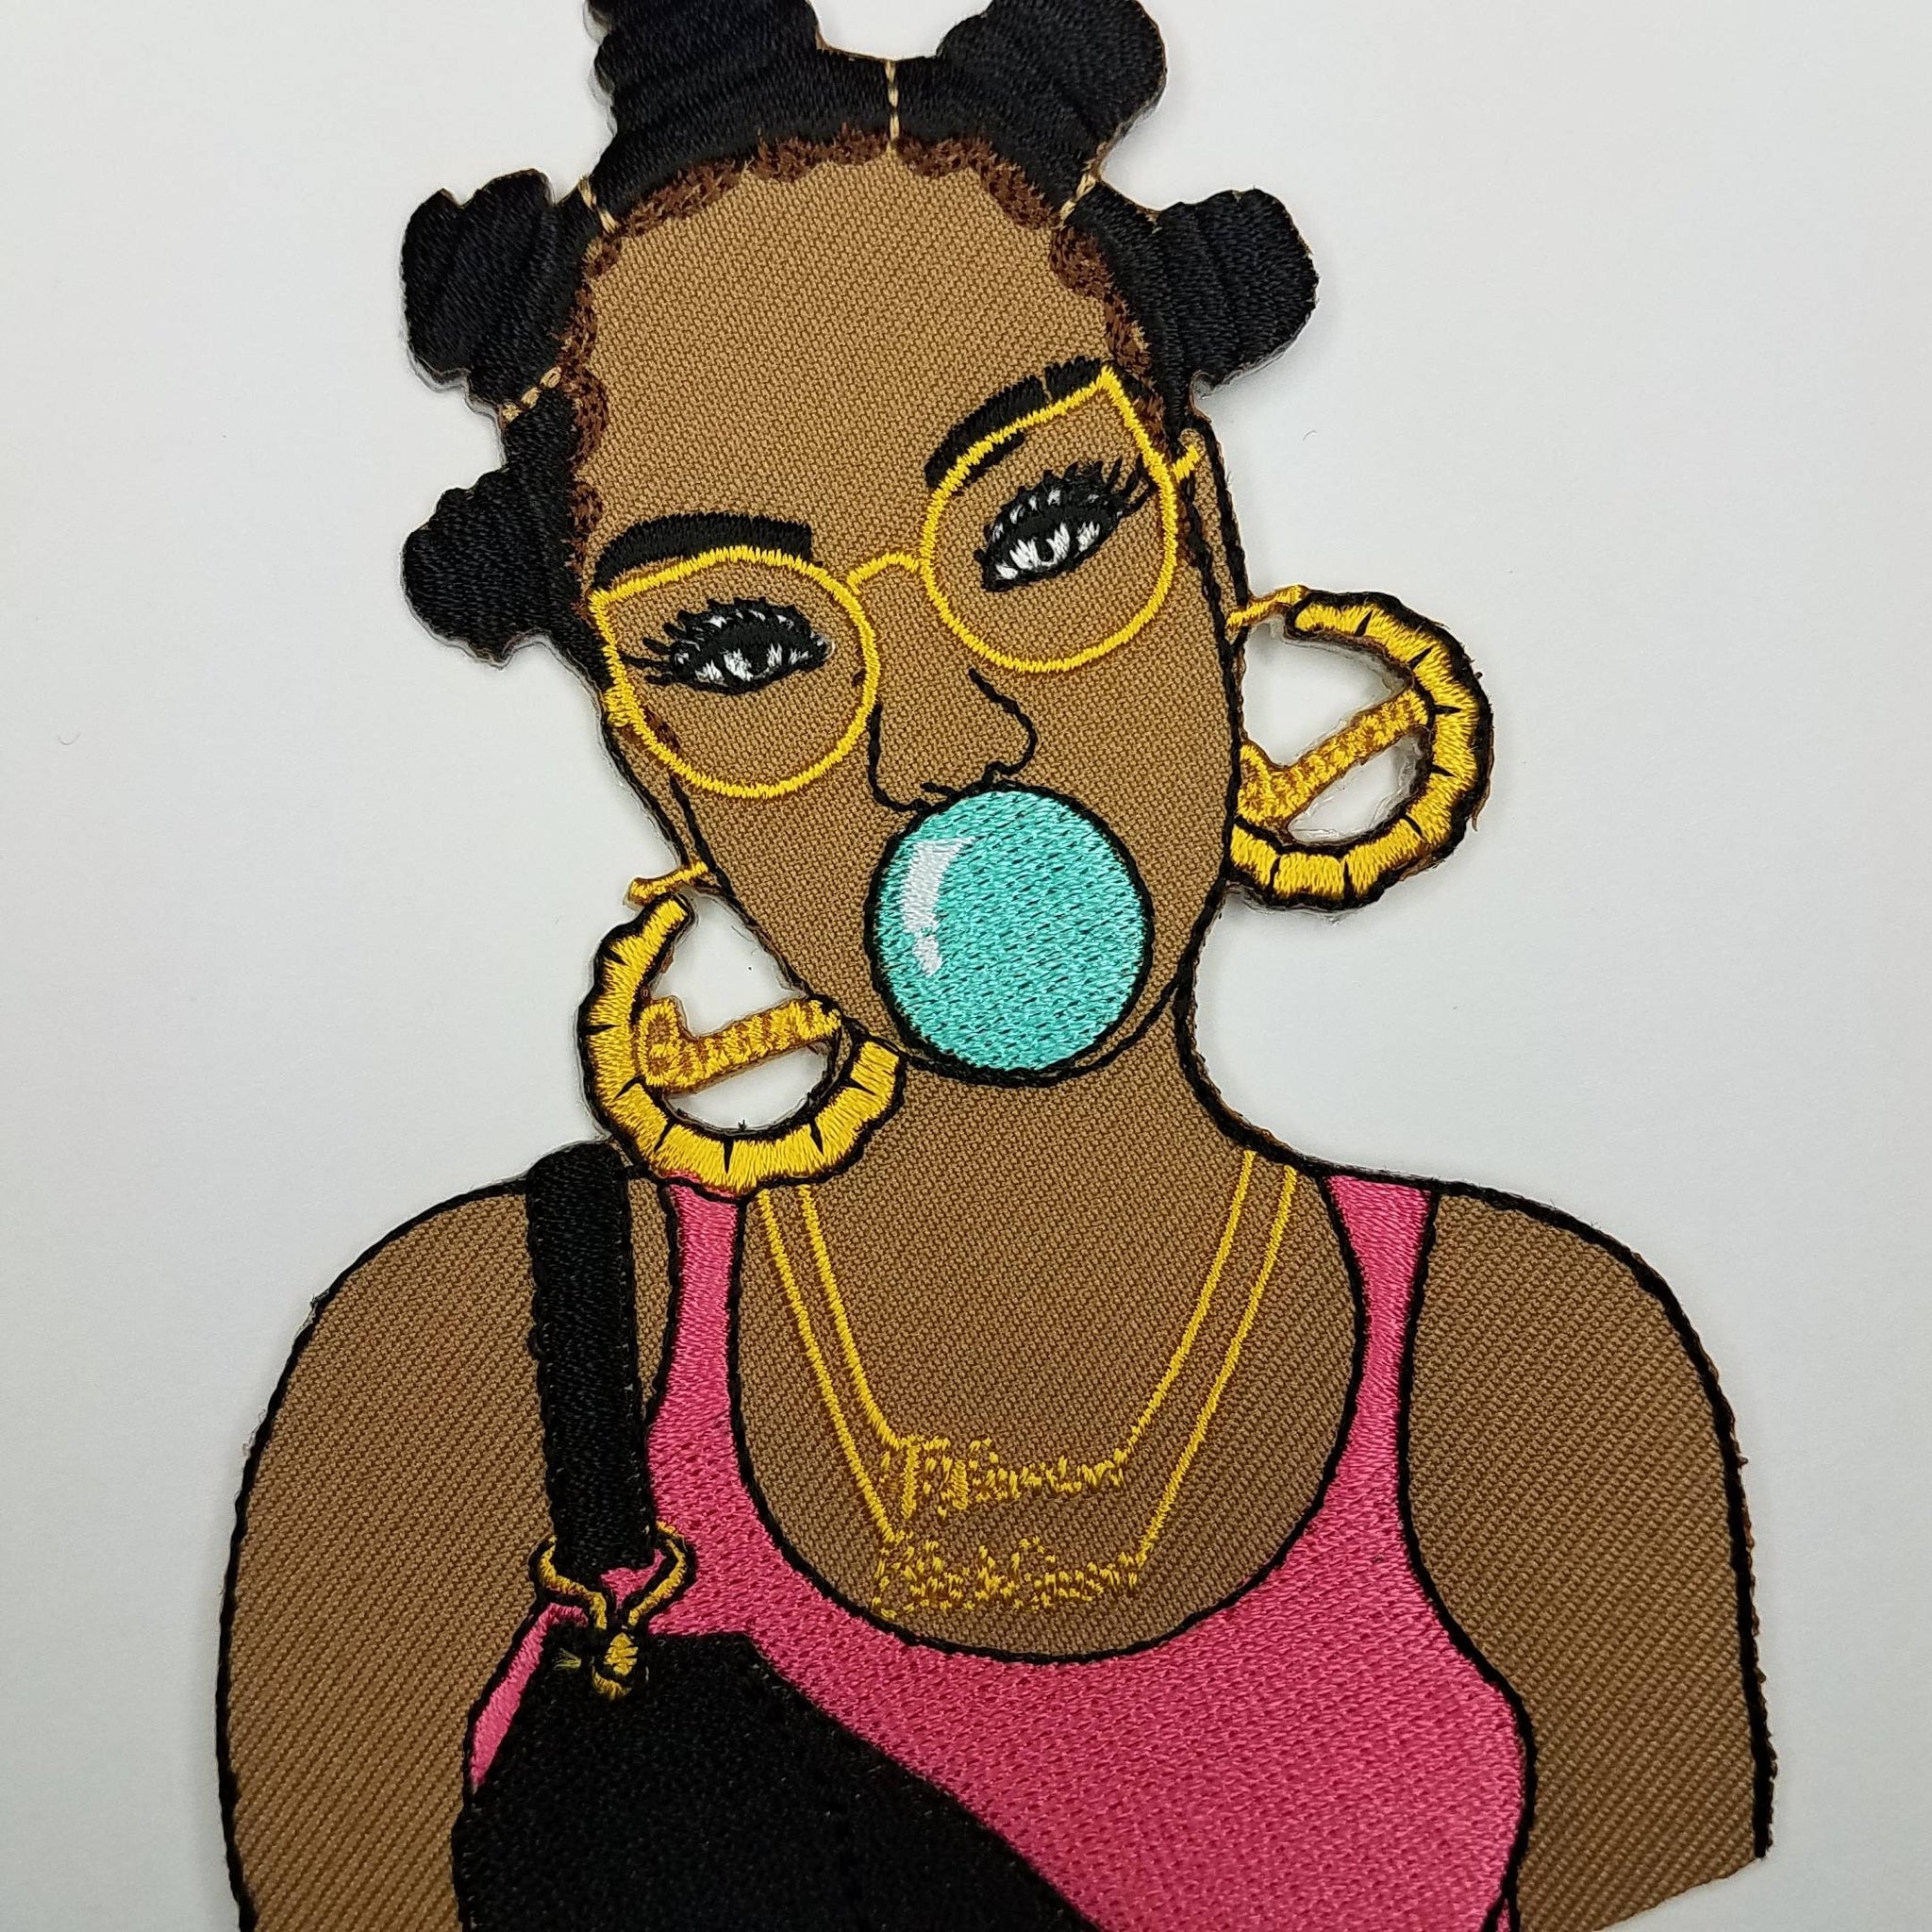 Embroidered Patch, Black Jumpsuit "Bubble Pop" | Blue Bubble, 4.5", Iron-on Applique, Patch for Clothing, Black Girl Magic Patch